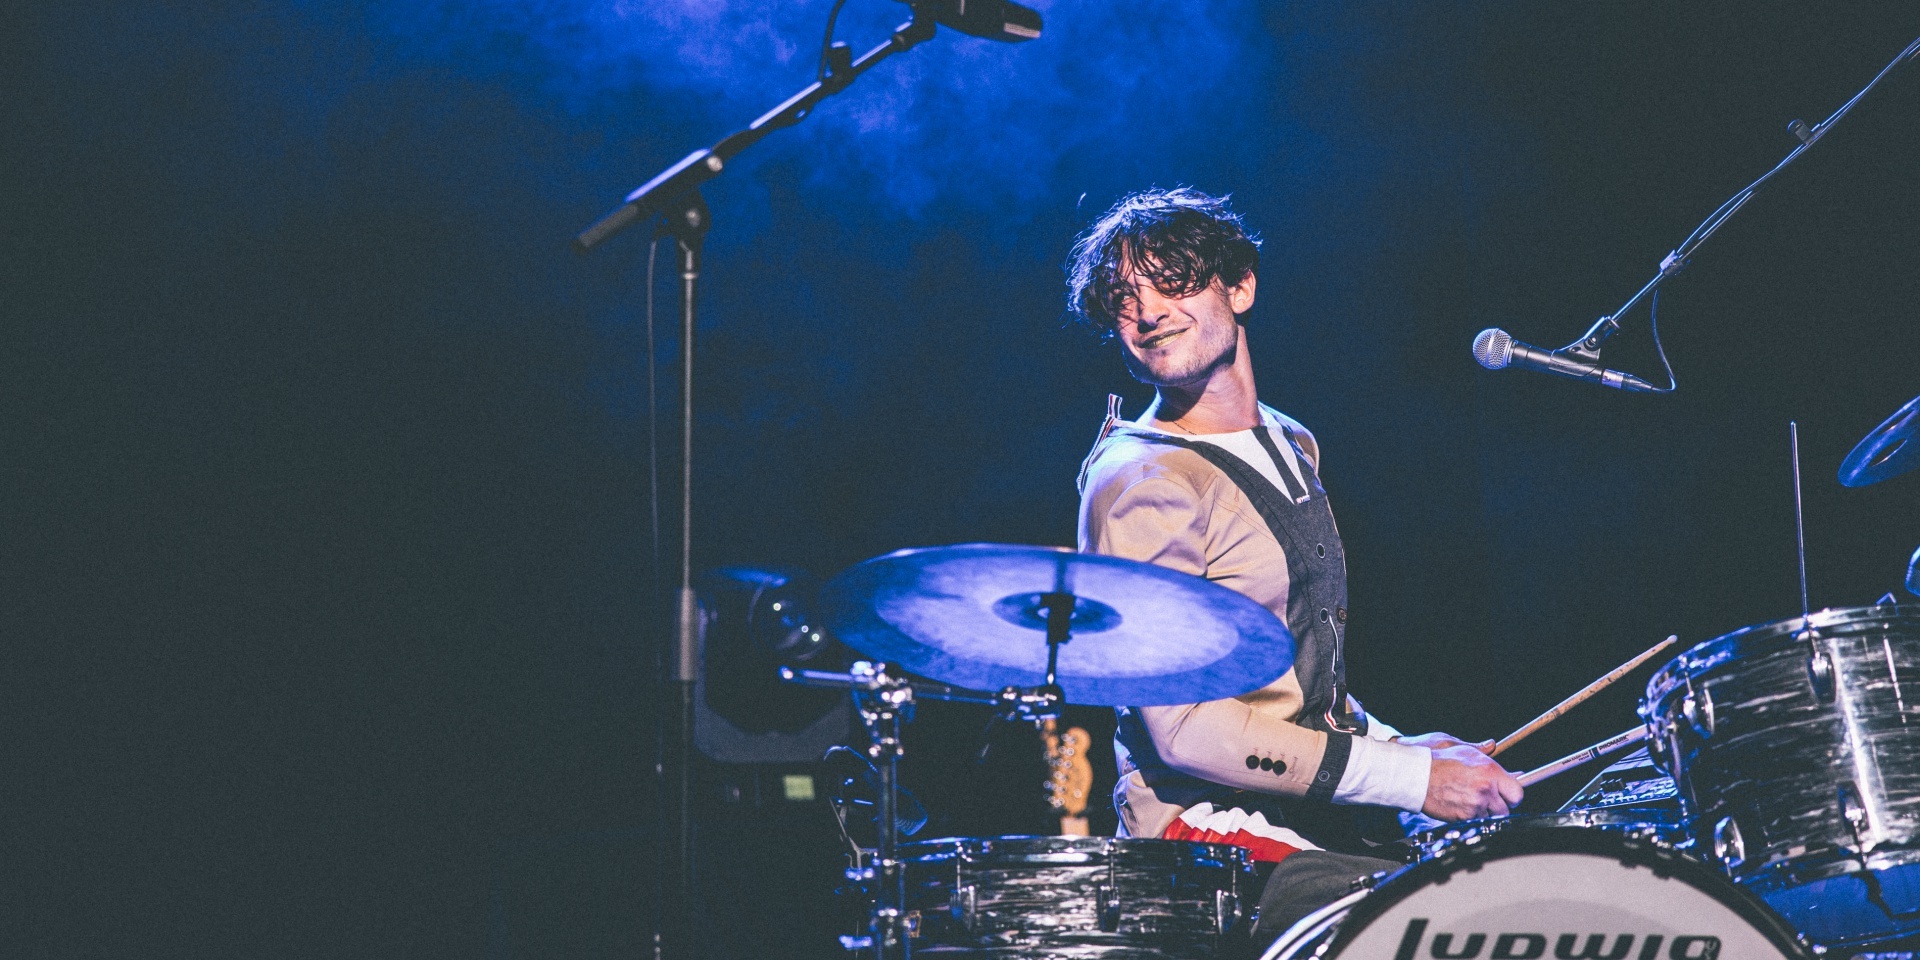 Ezra Miller smiles from behind his drumset during a Sons of an Illustrious Father gig in Singapore.